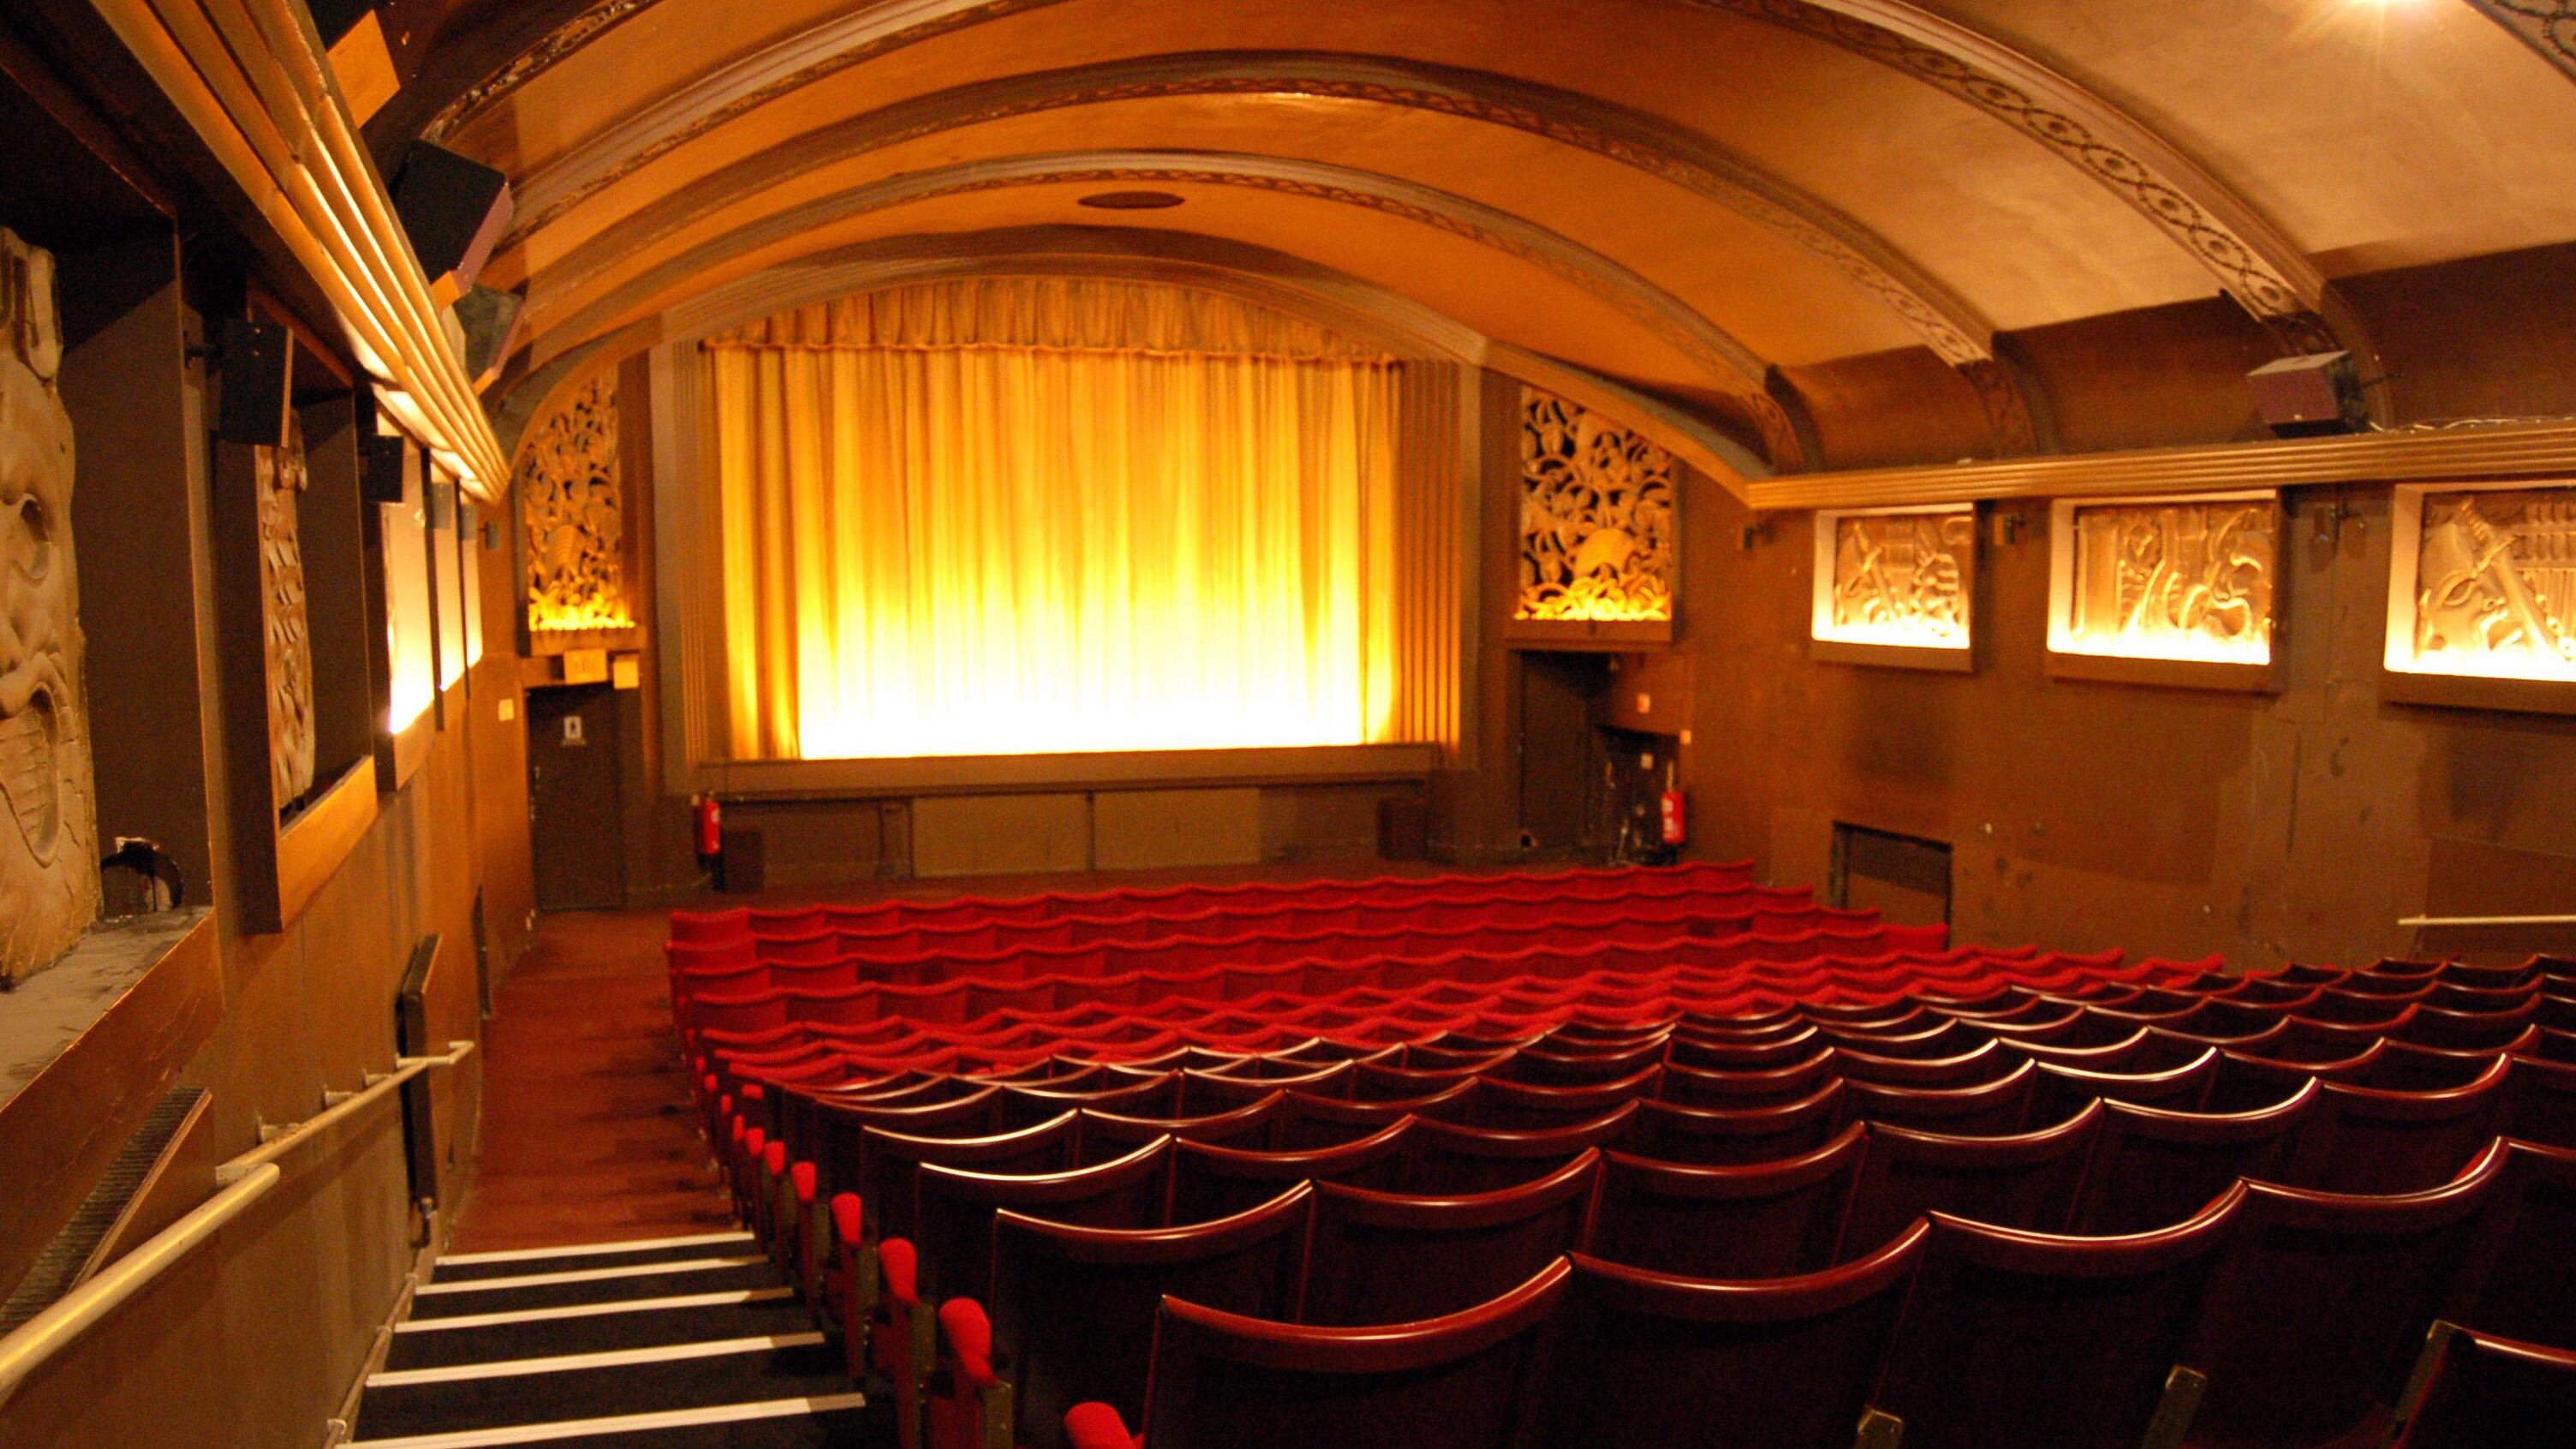 The Phoenix Cinema is one of the oldest in the country